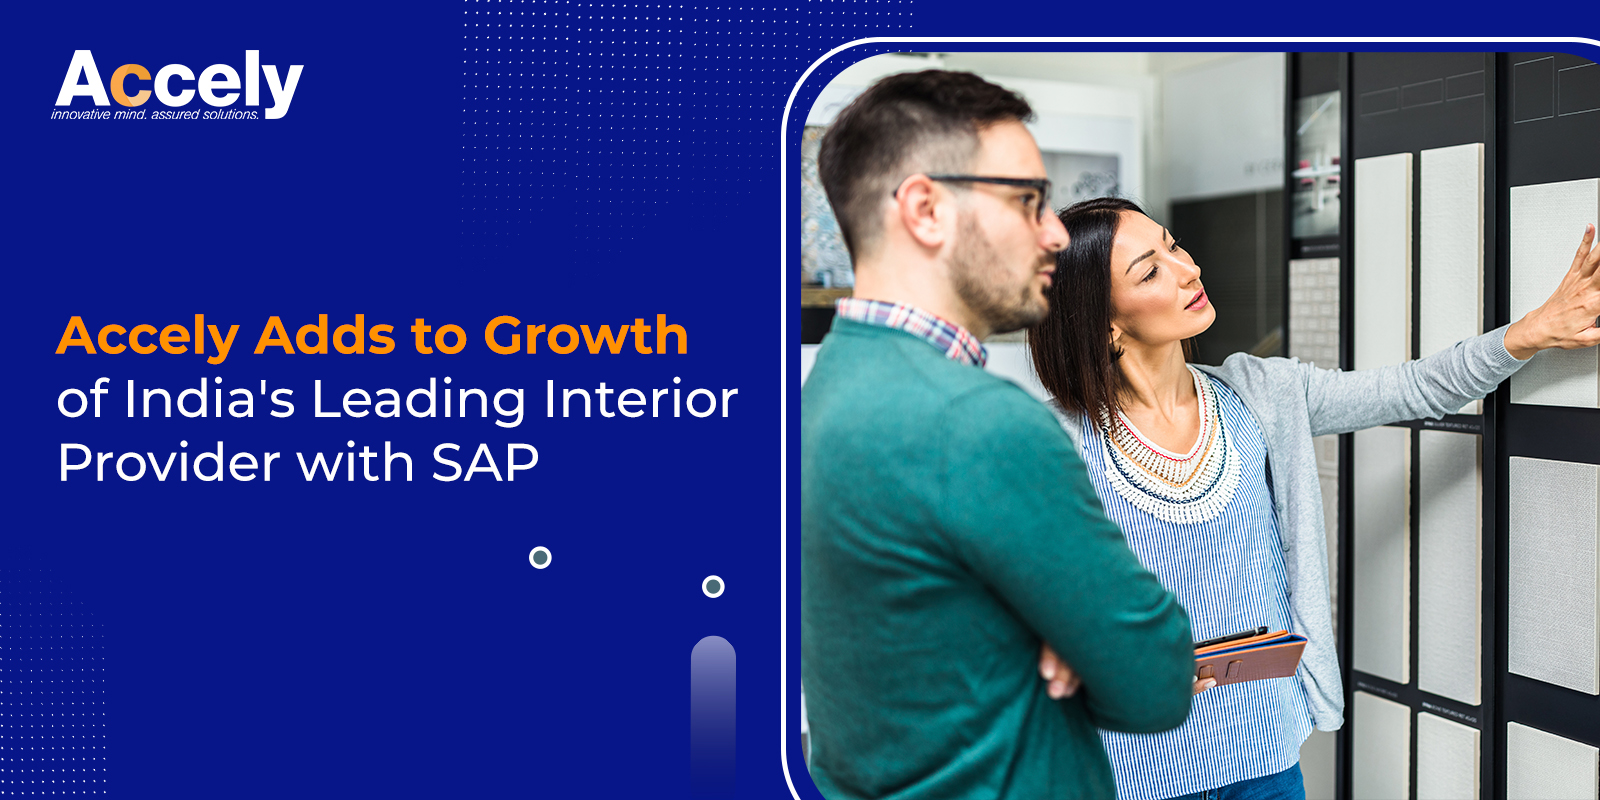 Accely Adds to Growth of India's Leading Interior Provider with SAP